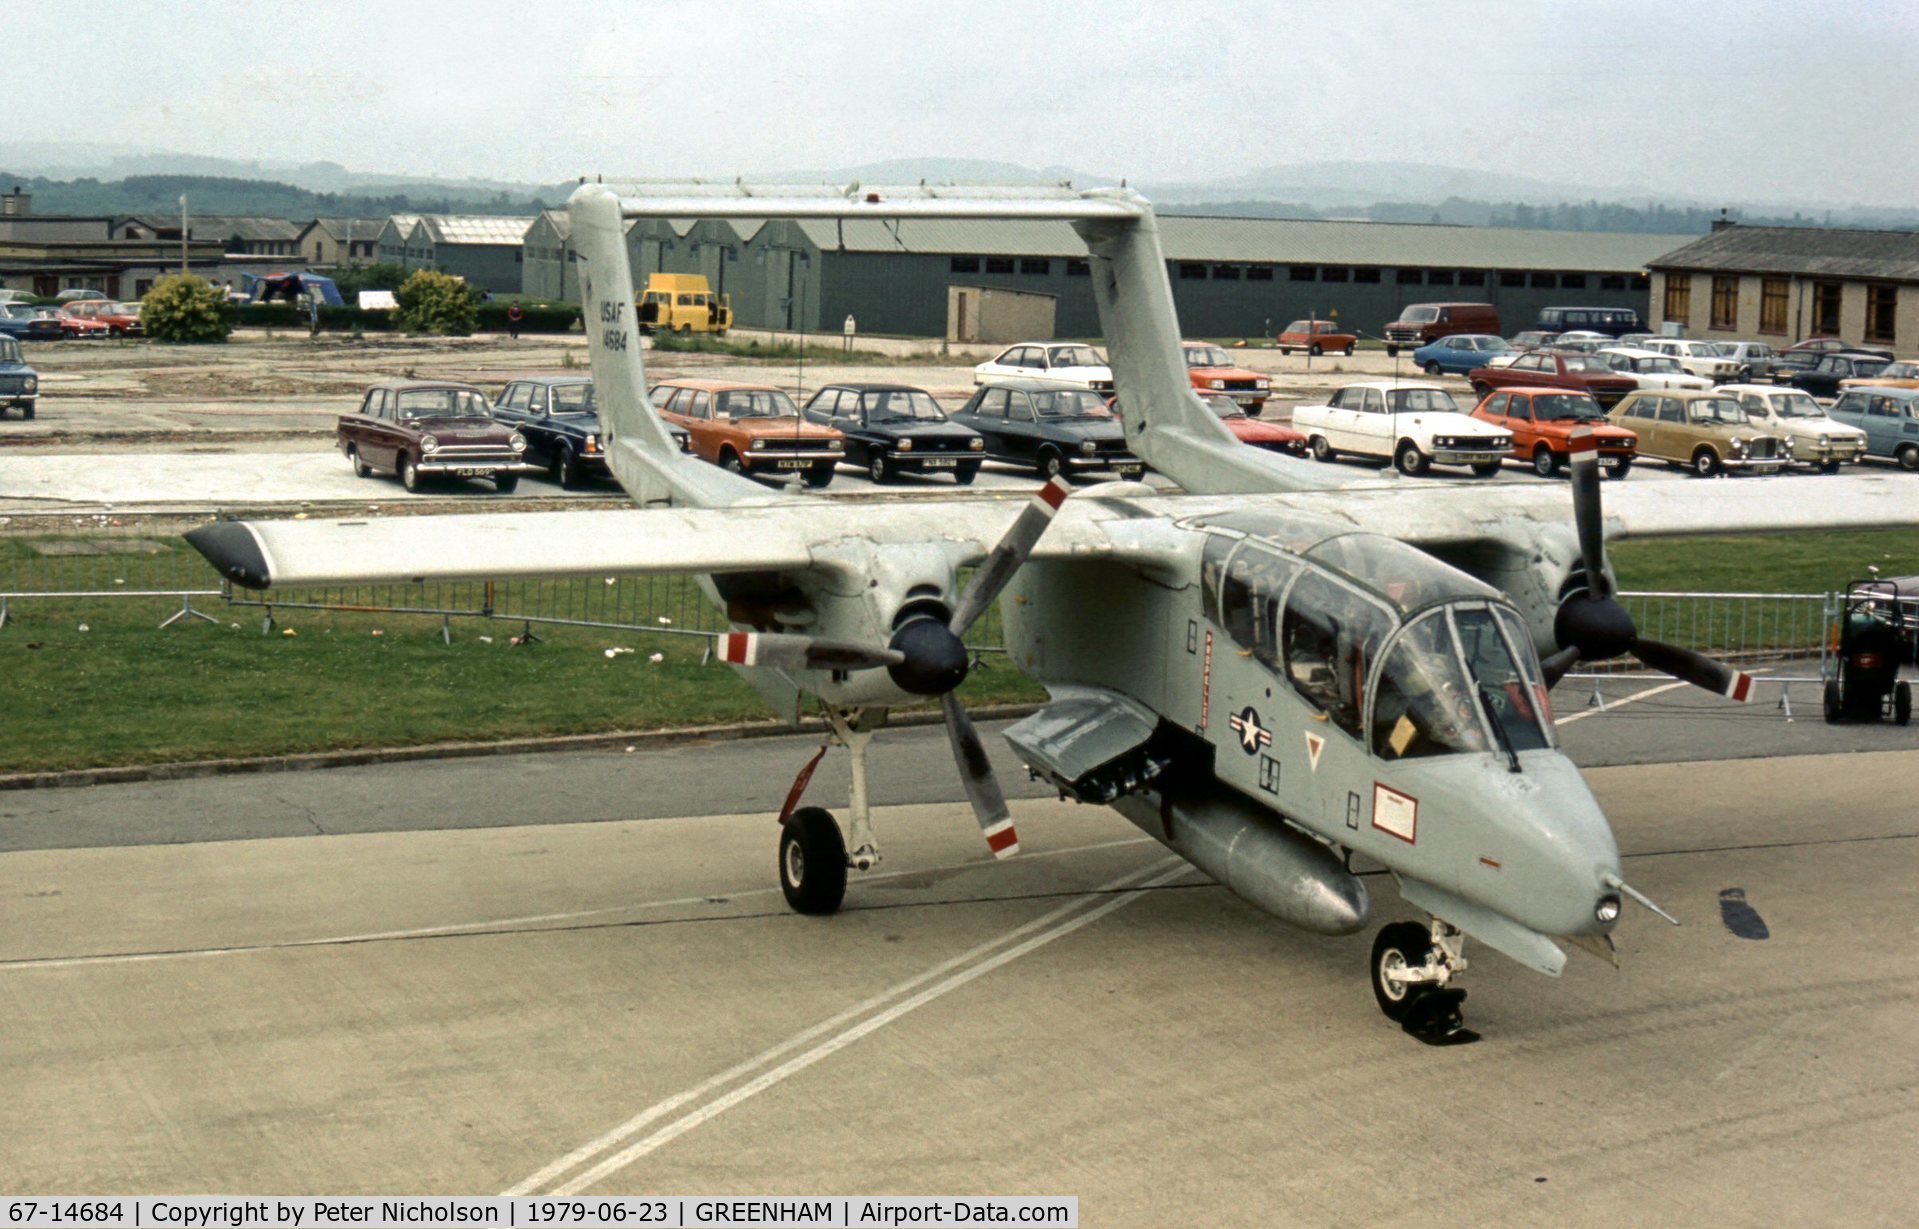 67-14684, 1967 North American OV-10A Bronco C/N 305-92, OV-10A Bronco of the 20th Tactical Air Support Squadron at the 1979 Intnl Air Tattoo at RAF Greenham Common.